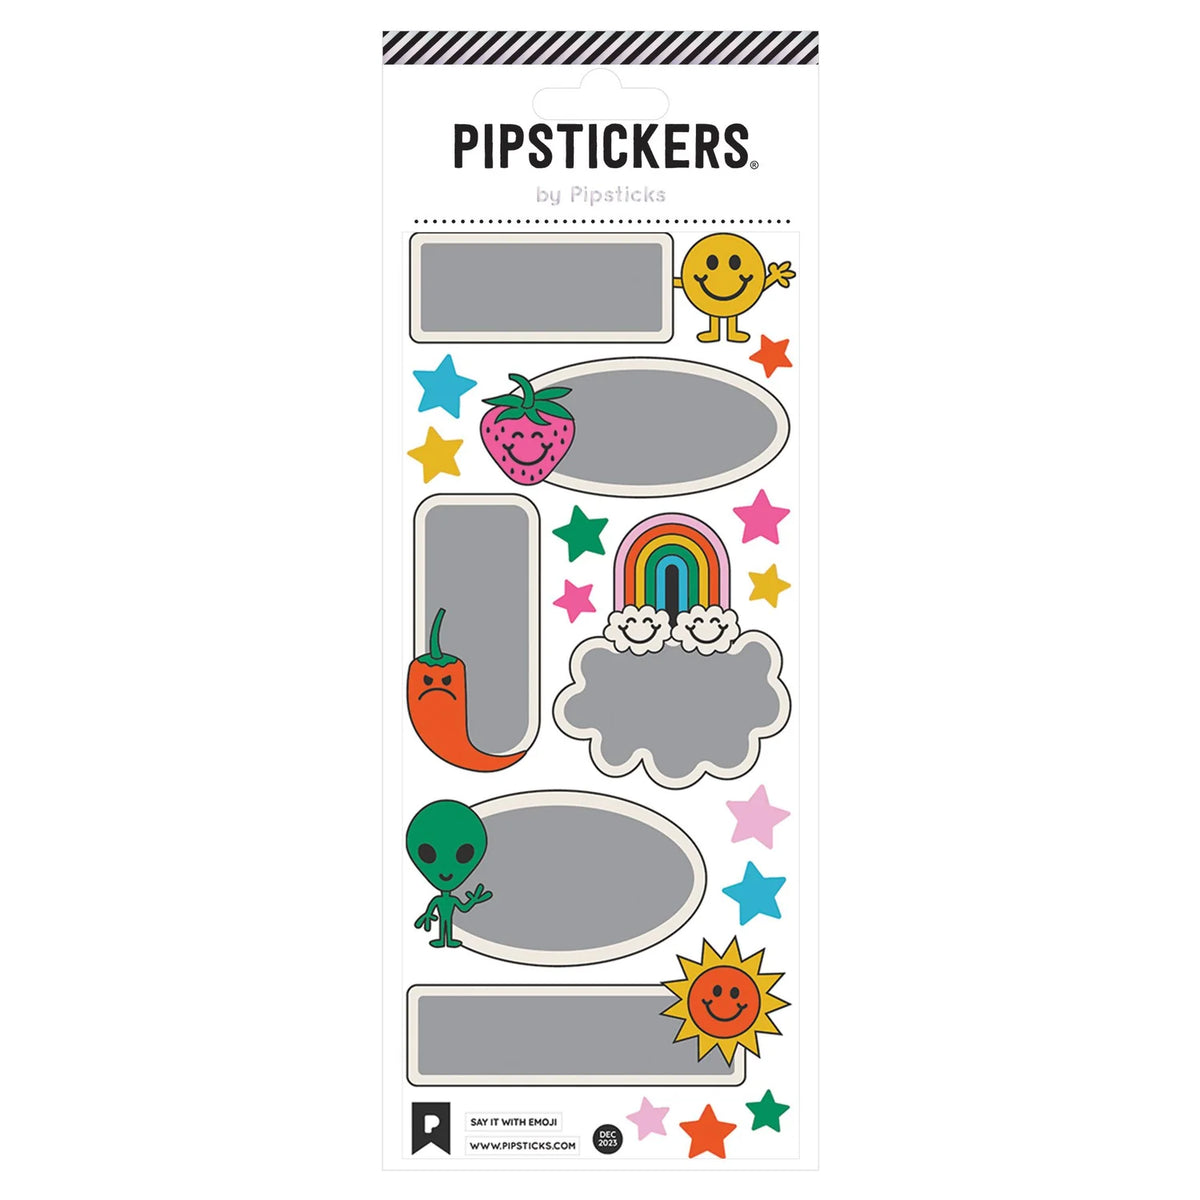 Pipstickers $5.99 Cover